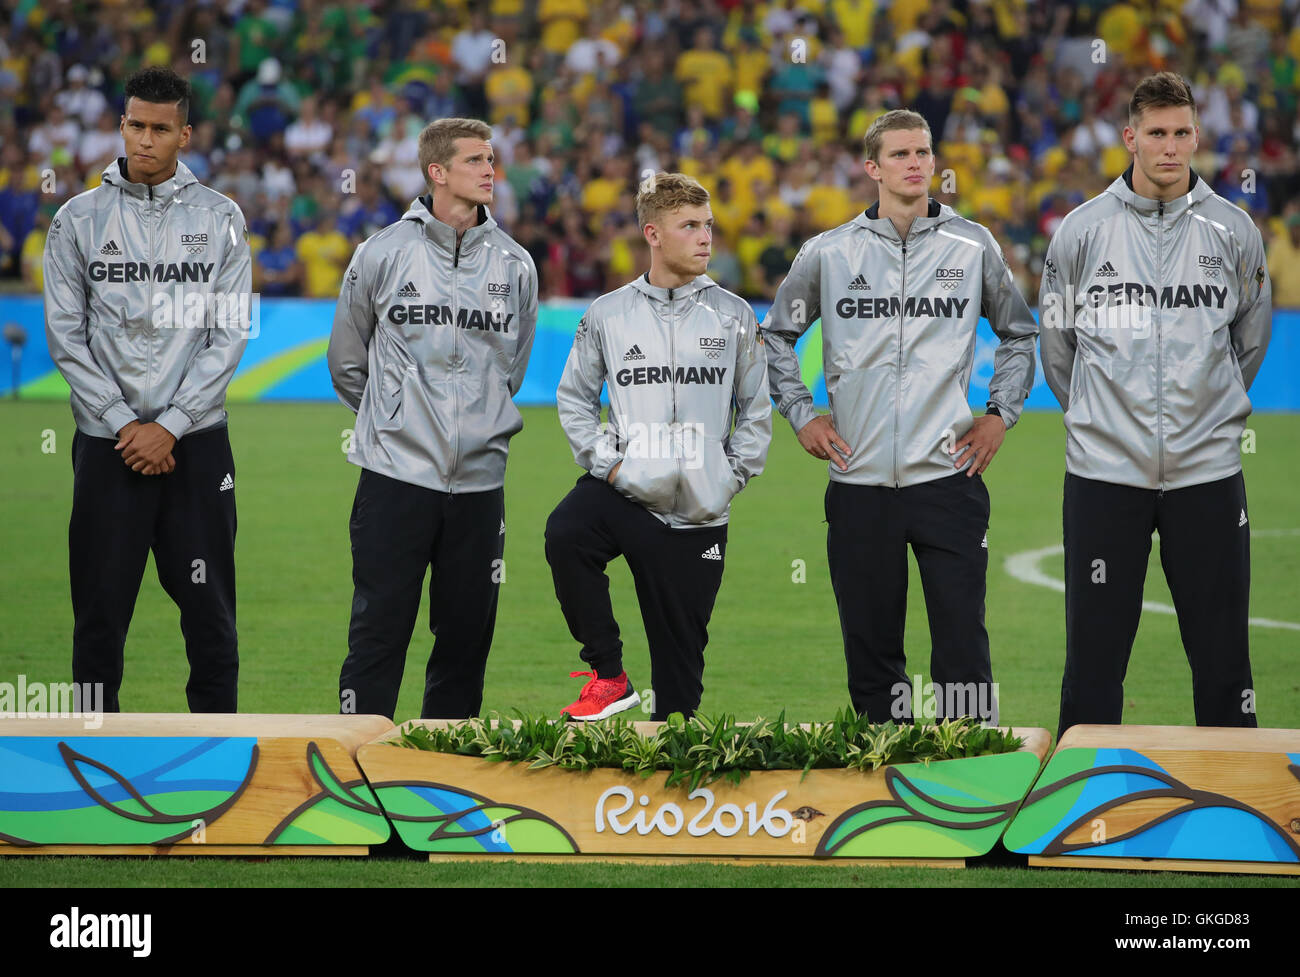 Rio de Janeiro, Brazil. 20th Aug, 2016. Silver medalist (L-R) Davie Selke, Sven Bender, Maximilian Meyer, Lars Bender, Niklas Suele of Germany reacts during the medal ceremony after losing the Men's soccer Gold Medal Match between Brazil and Germany during the Rio 2016 Olympic Games at the Maracana in Rio de Janeiro, Brazil, 20 August 2016. Photo: Friso Gentsch/dpa/Alamy Live News Stock Photo